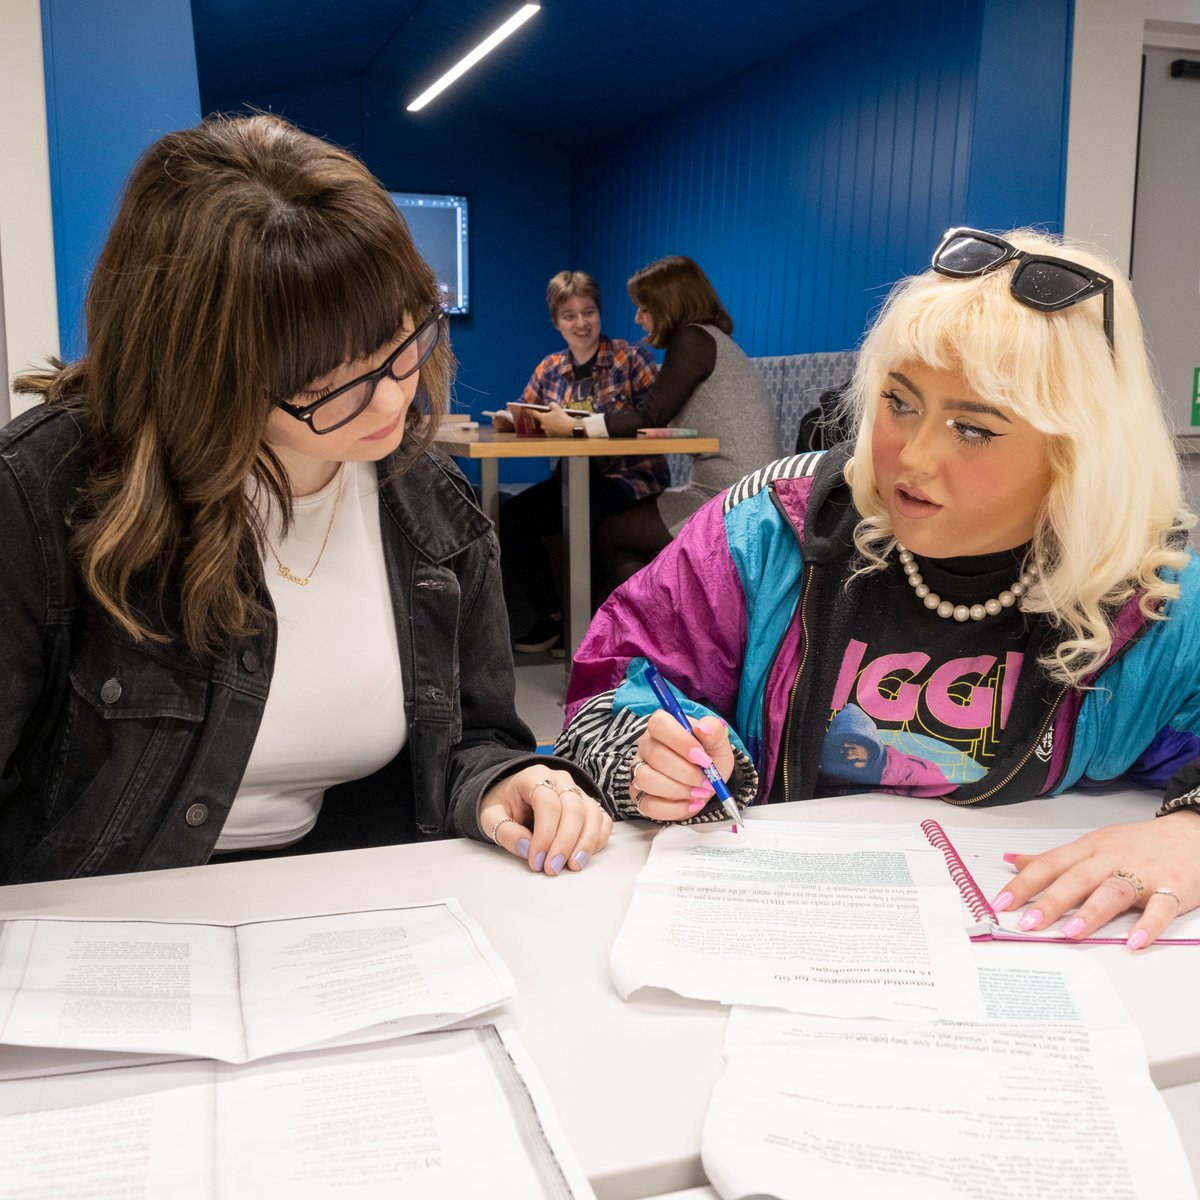 Do you know that Glasgow Clyde College offers a wide range of SQA Higher and Nat 5 courses in the evening? If you're looking to get a specific course for entry to further study or want to brush up on your skills, find out more at: bit.ly/4b7uEjy